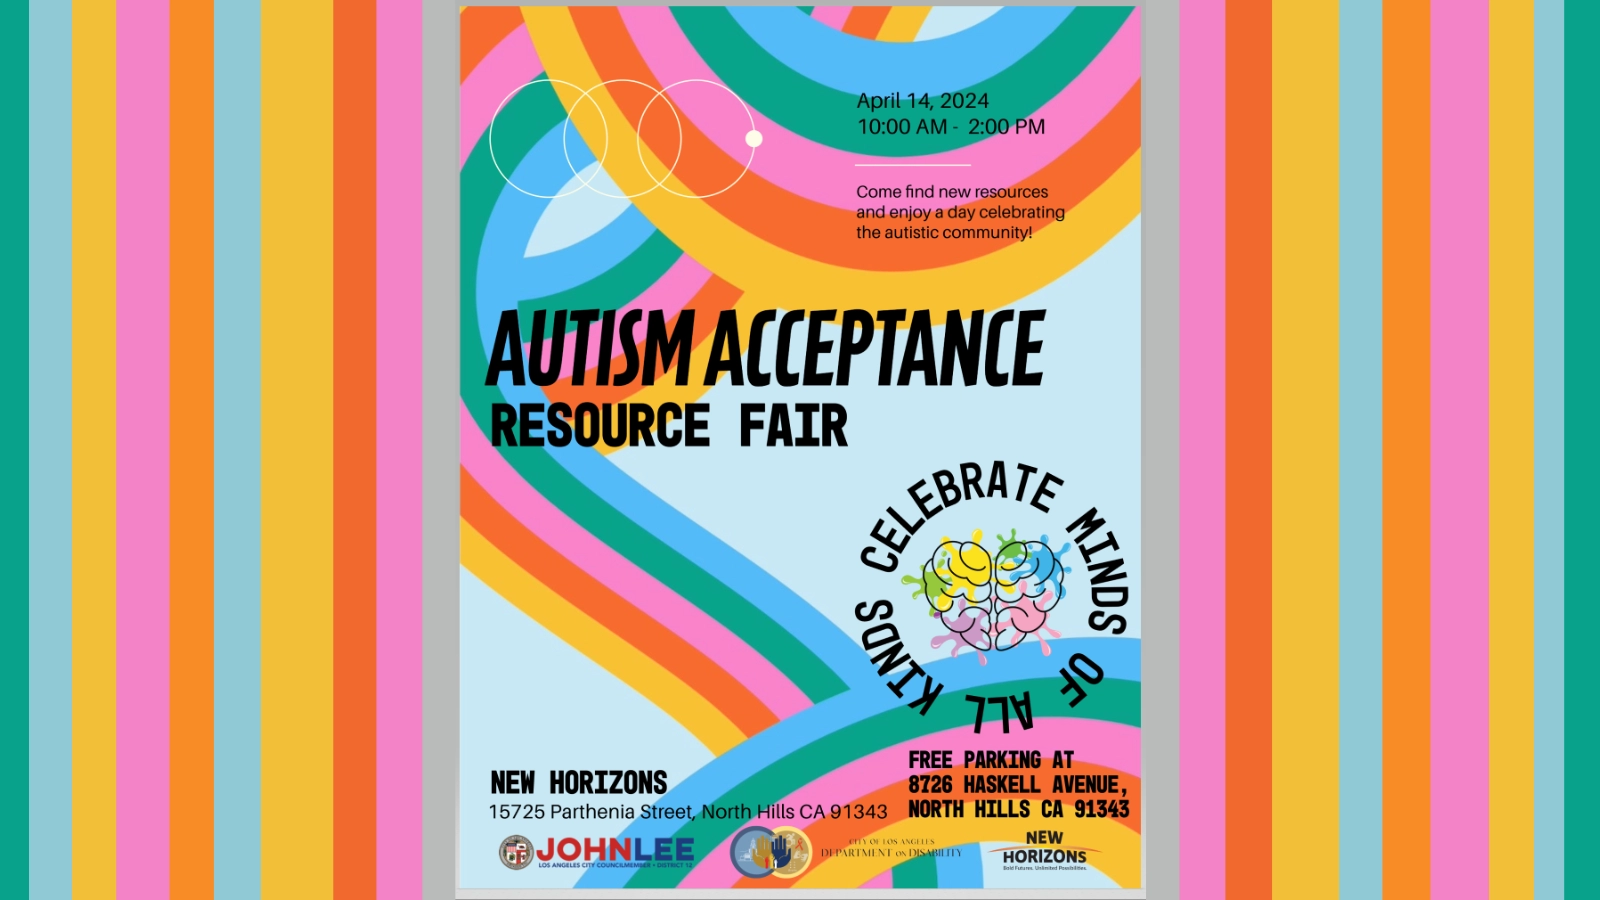 Text reads April 14, 2024 10:00AM-2:00PM. Come find new resources and enjoy a day celebrating the autistic community! Autism Acceptance Resource Fair. Celebrate minds of all kinds (written in a circle format with brain inside). New Horizons 15725 Parthenia Street, North Hills CA 91343. Free parking at 8726 Haskell Avenue, North Hills CA 91343. John Lee Los Angeles City Council Member logo. City of Los Angeles Department on Disability logo. New Horizons logo.